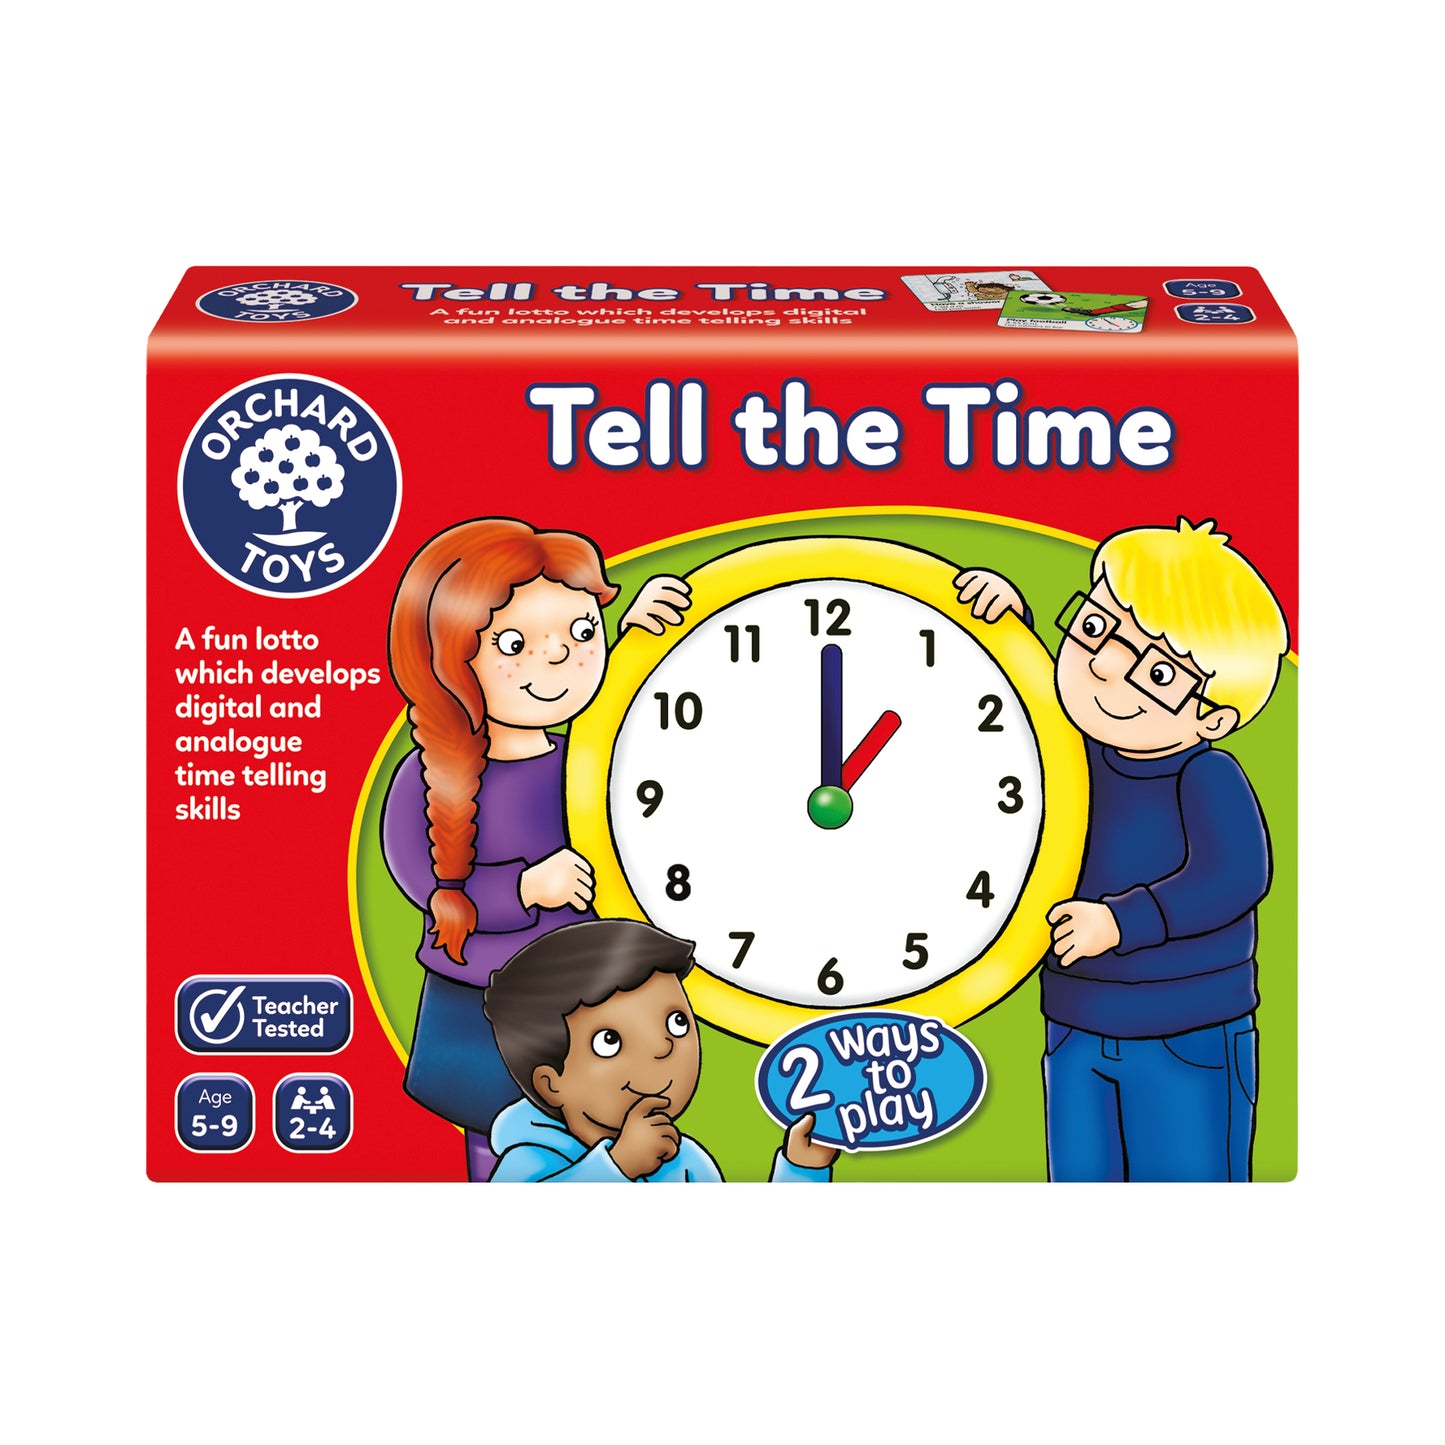 Orchard Toys Tell the Time Lotto Game 生活時間表達配對遊戲